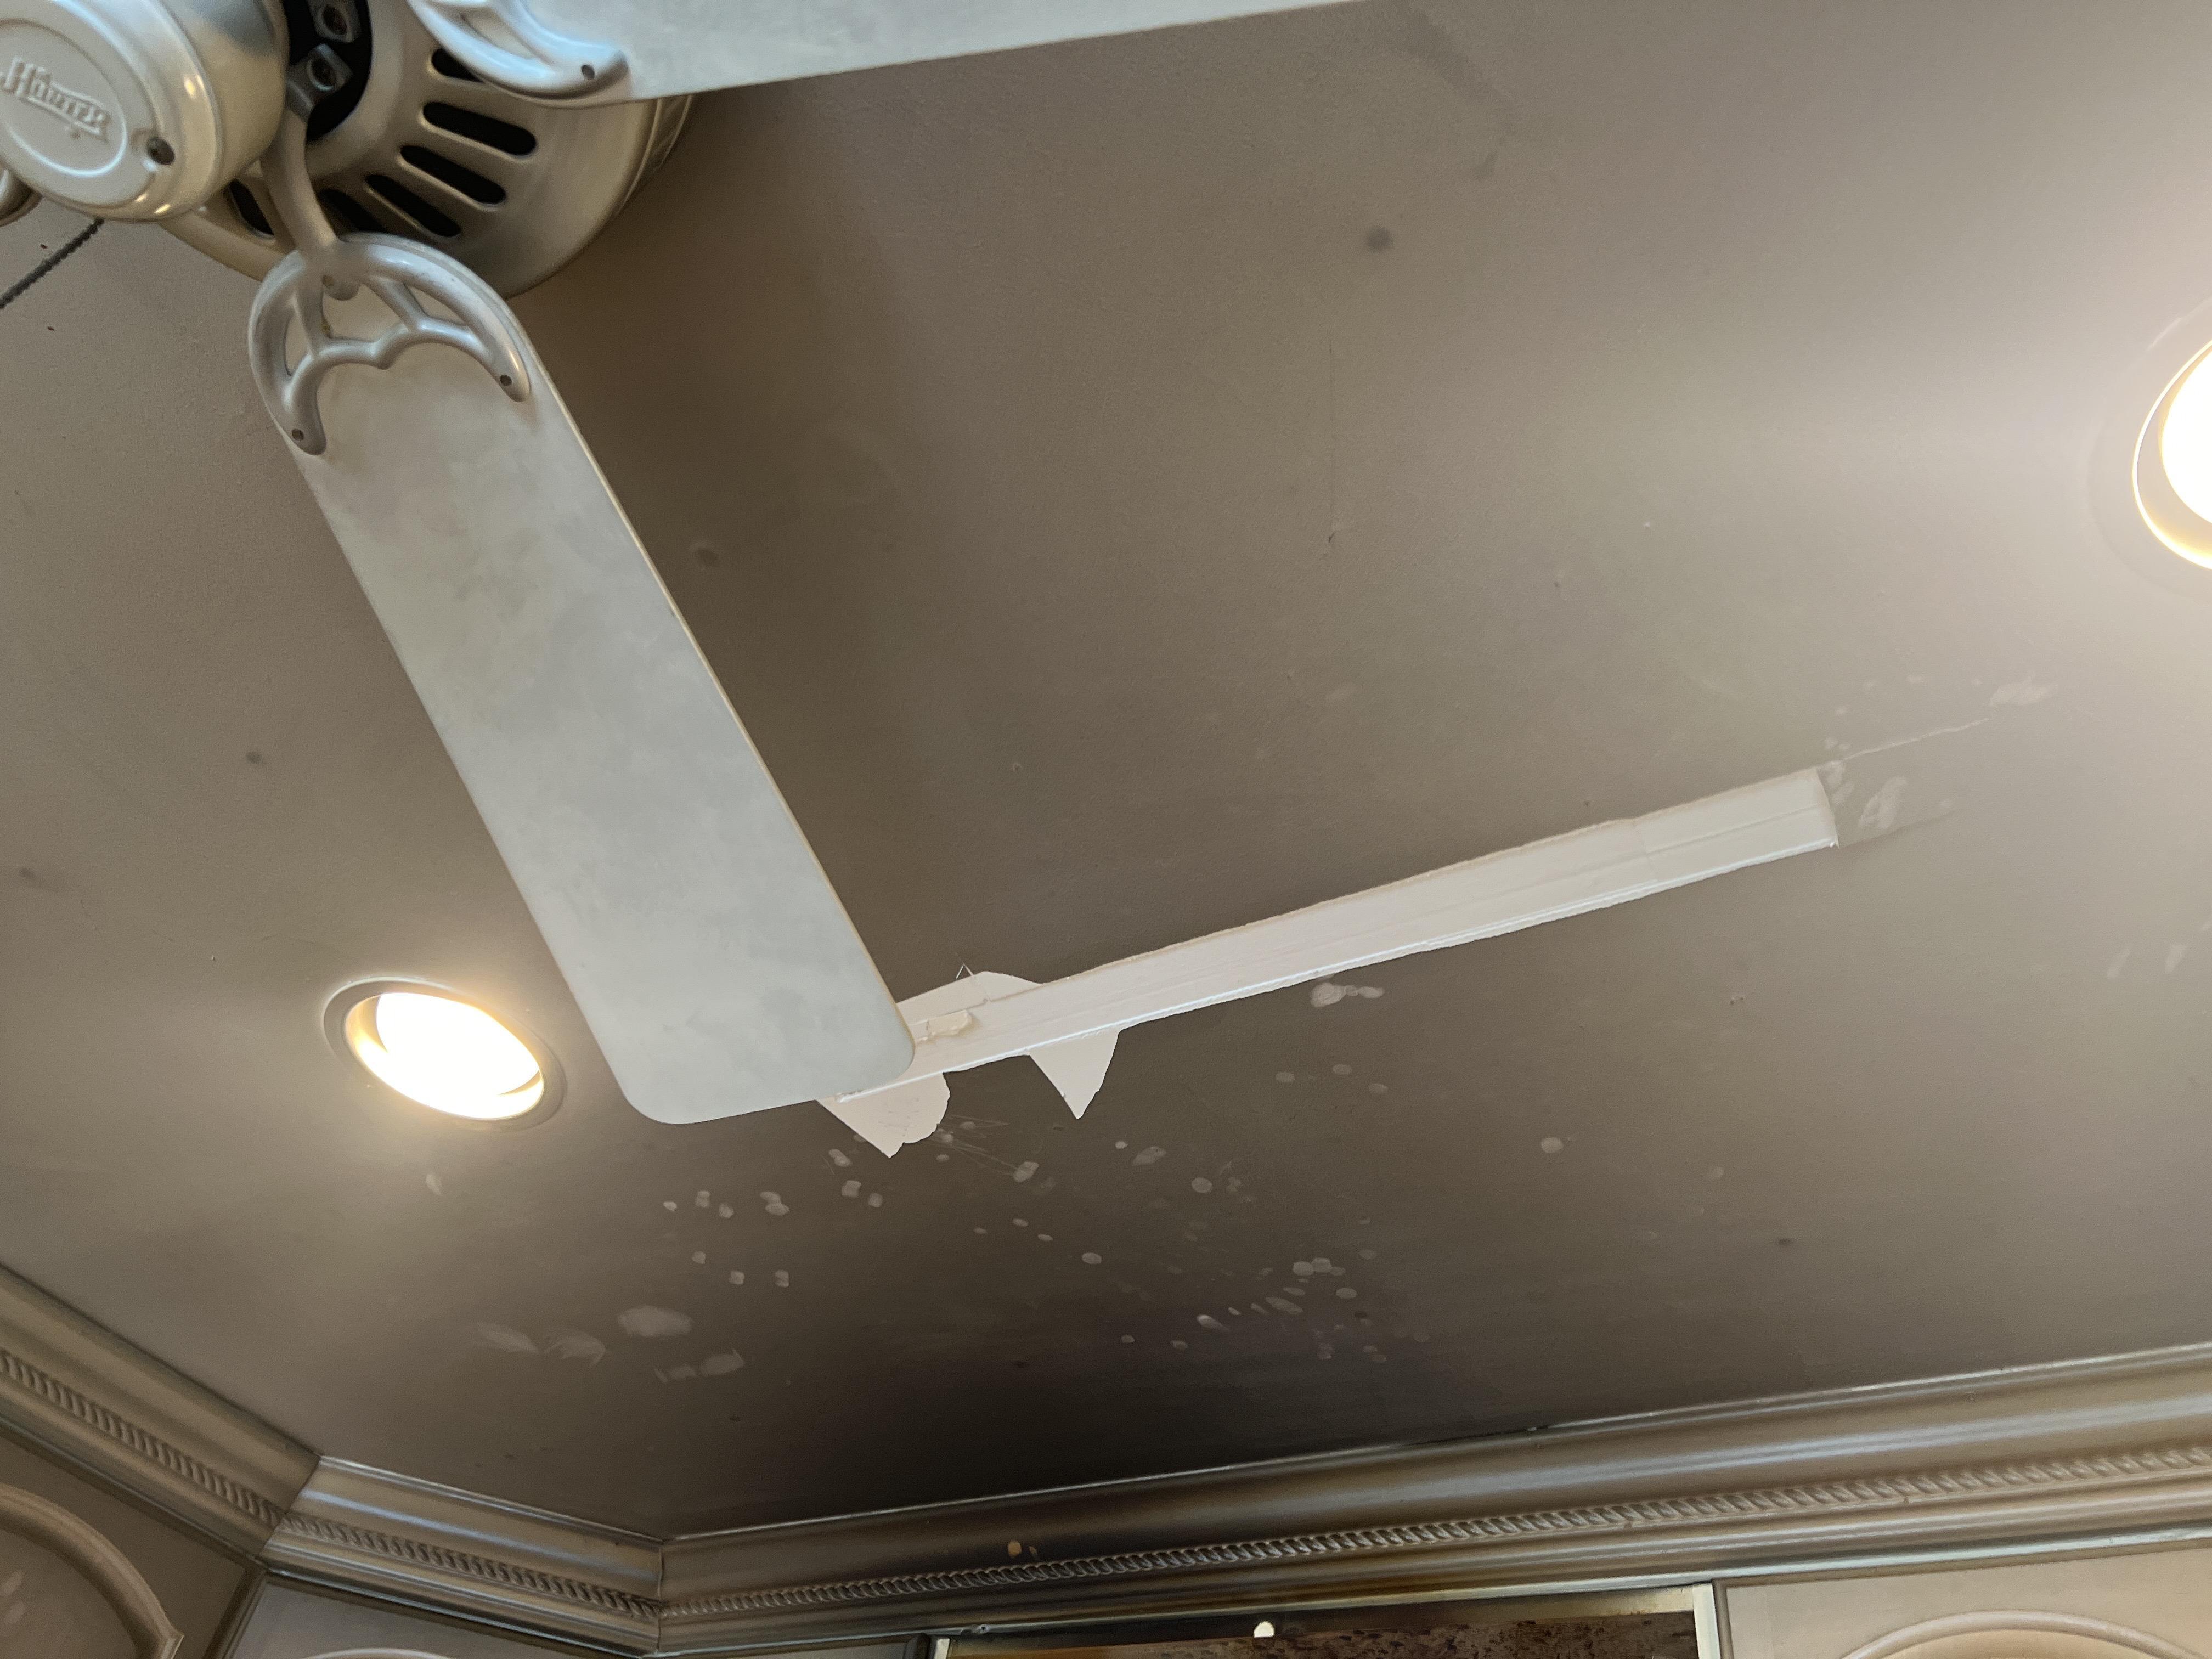 Fire Damage on Ceiling